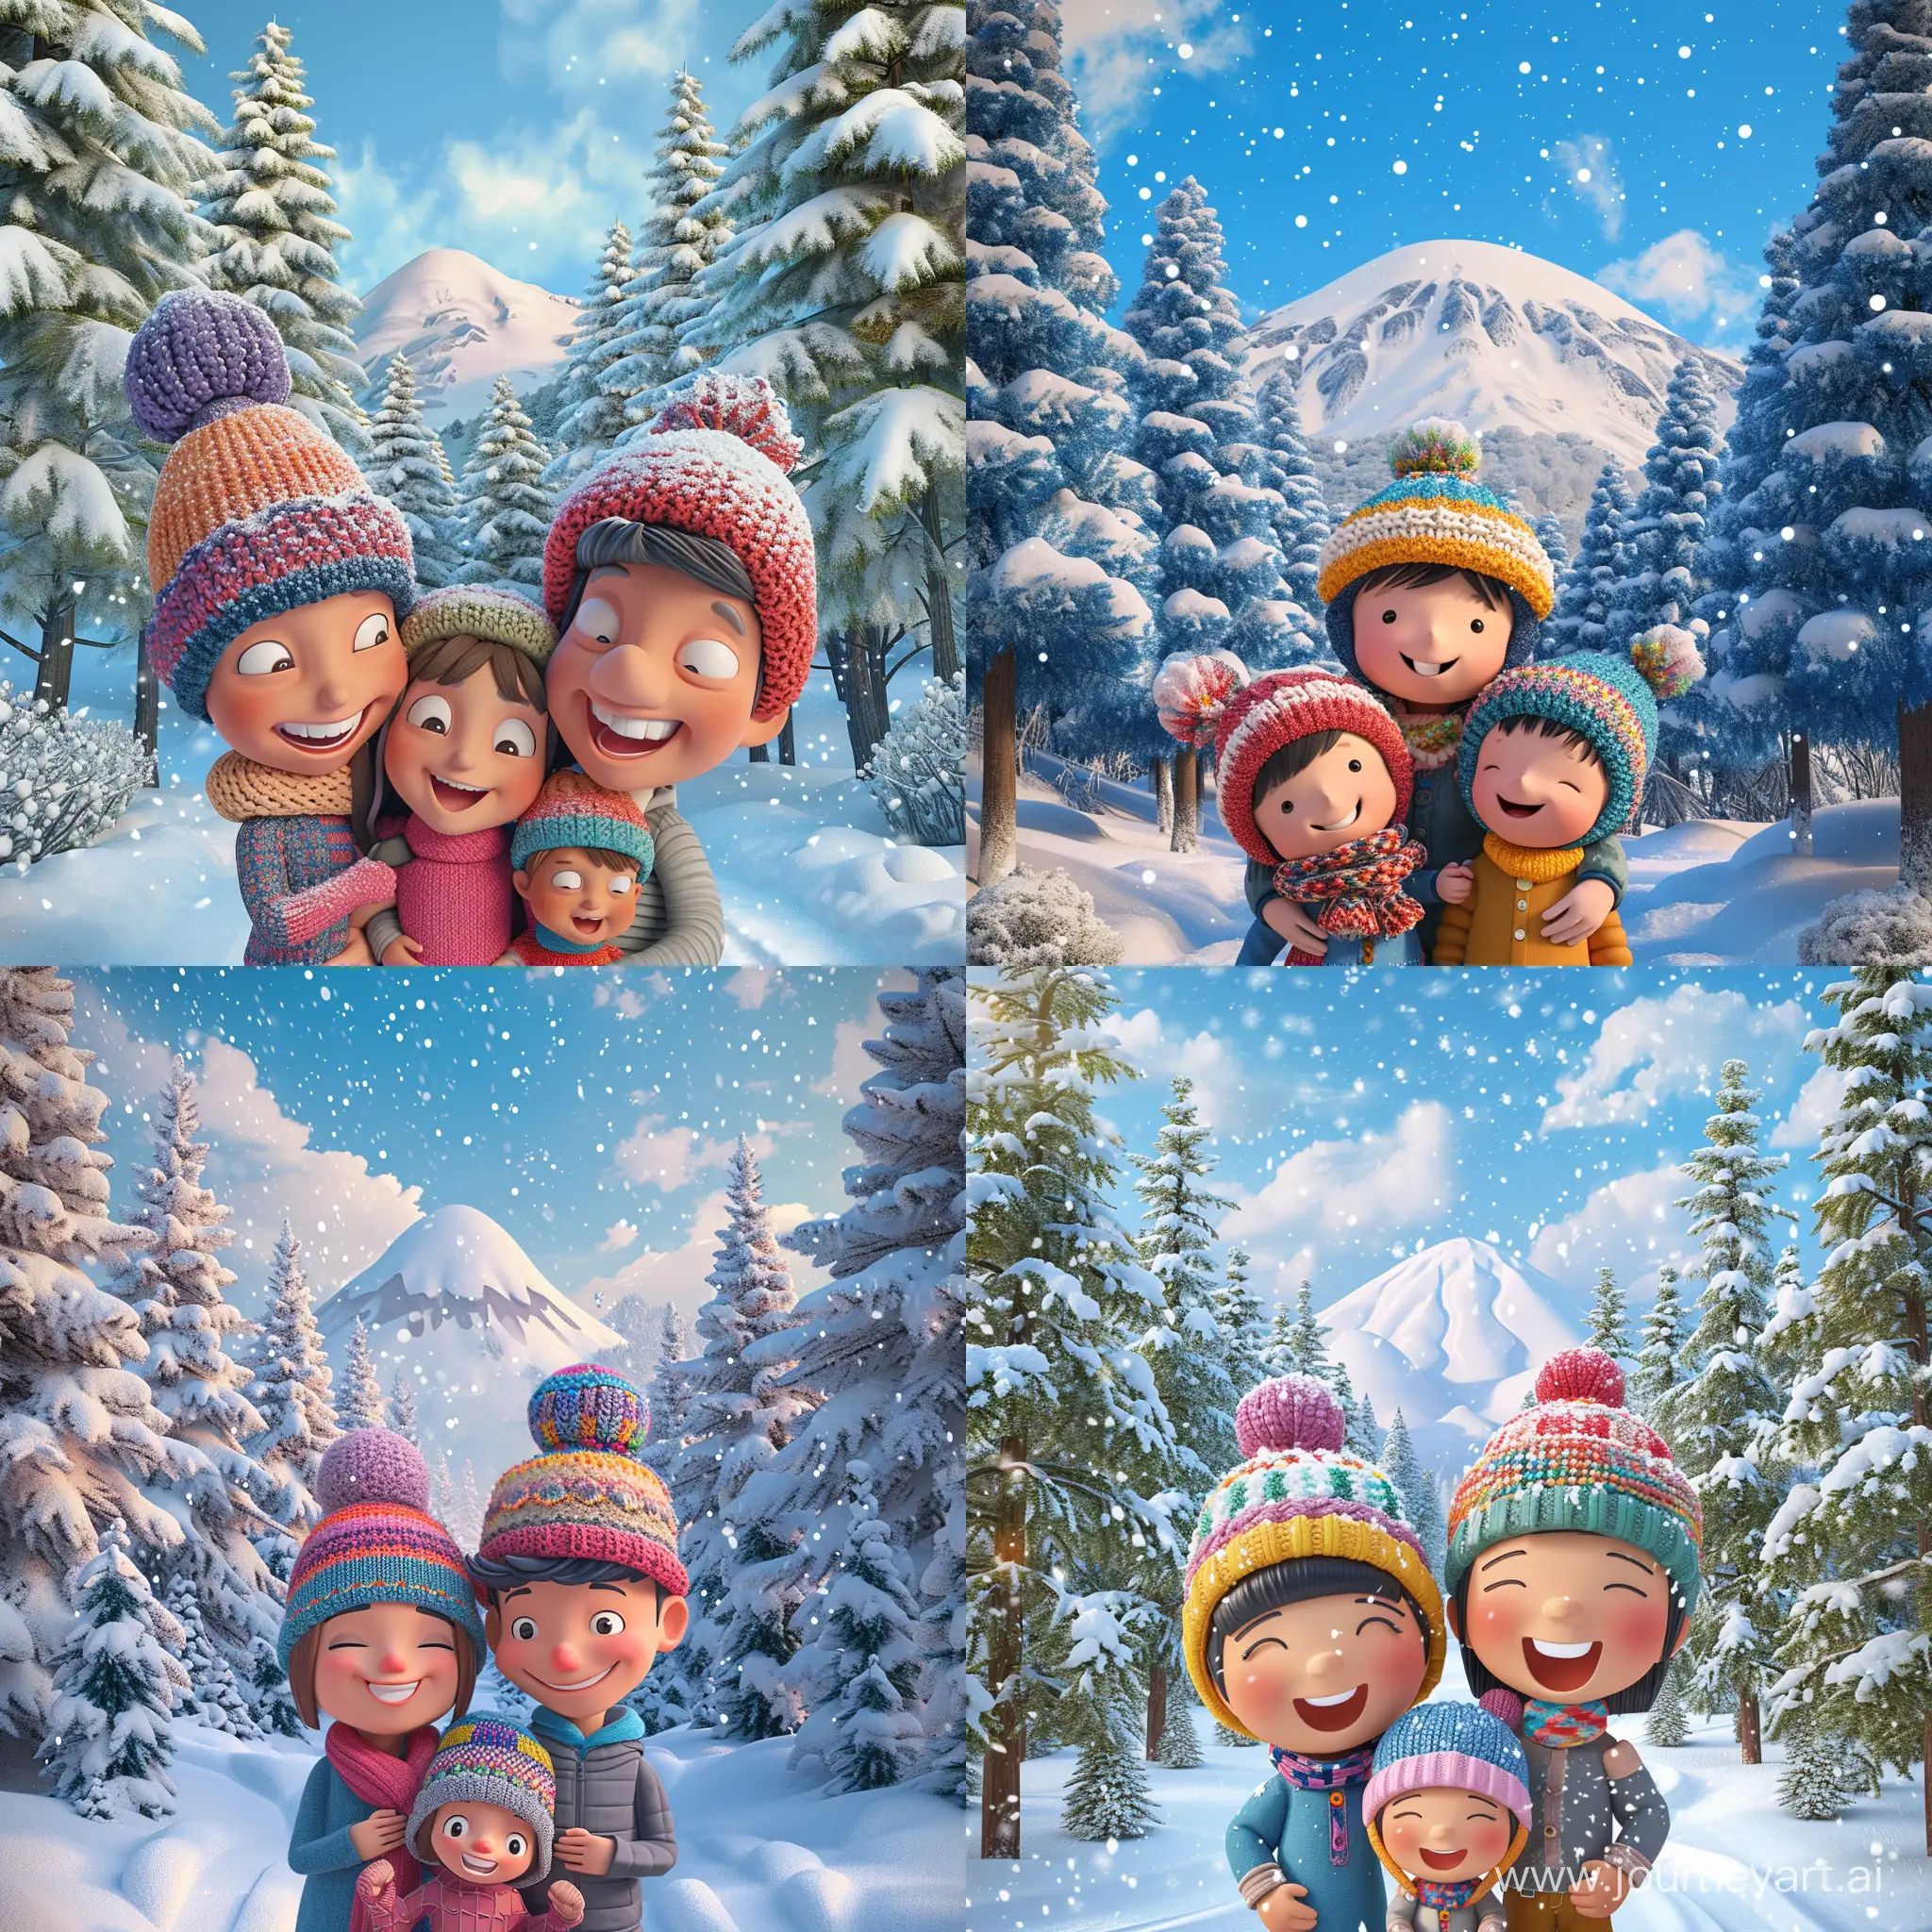 A happy 3D cartoon family poses against the backdrop of a picturesque winter landscape. Fir trees covered with fluffy caps of snow stand on either side. On the right rises a fabulous snow-capped mountain with sparkling slopes. Mom, dad, boy and girl in knitted colorful hats smile happily, their cheeks flushed from the frosty air. Behind the family you can see the Alpine meadows covered with snowy fluffy snow, winding paths of the winter forest. The purest snow shimmers and shines in the sunlight everywhere.